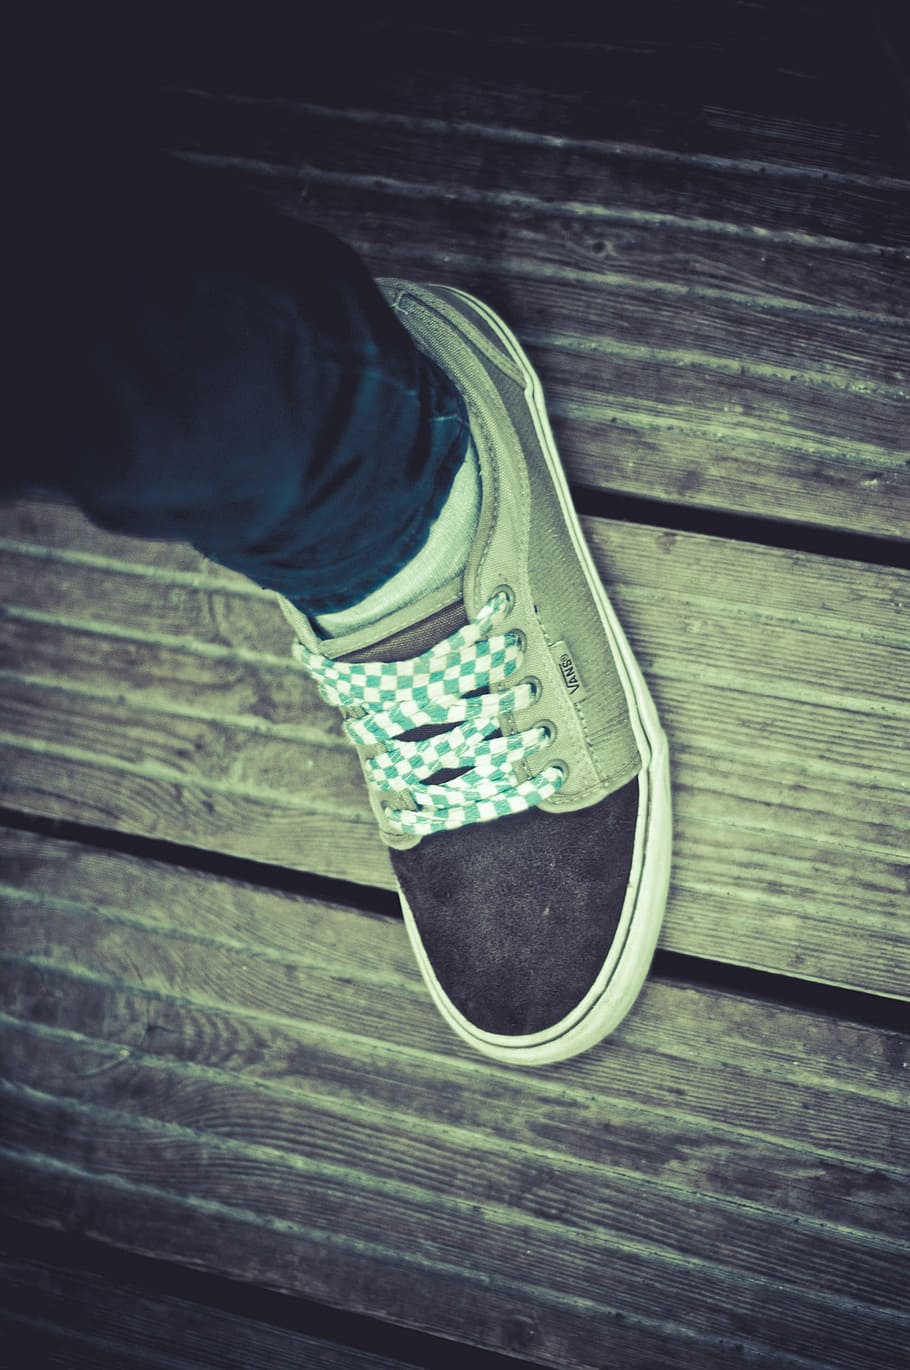 person wearing black and gray Vans skate shoe, unpaired, chukka, HD wallpaper